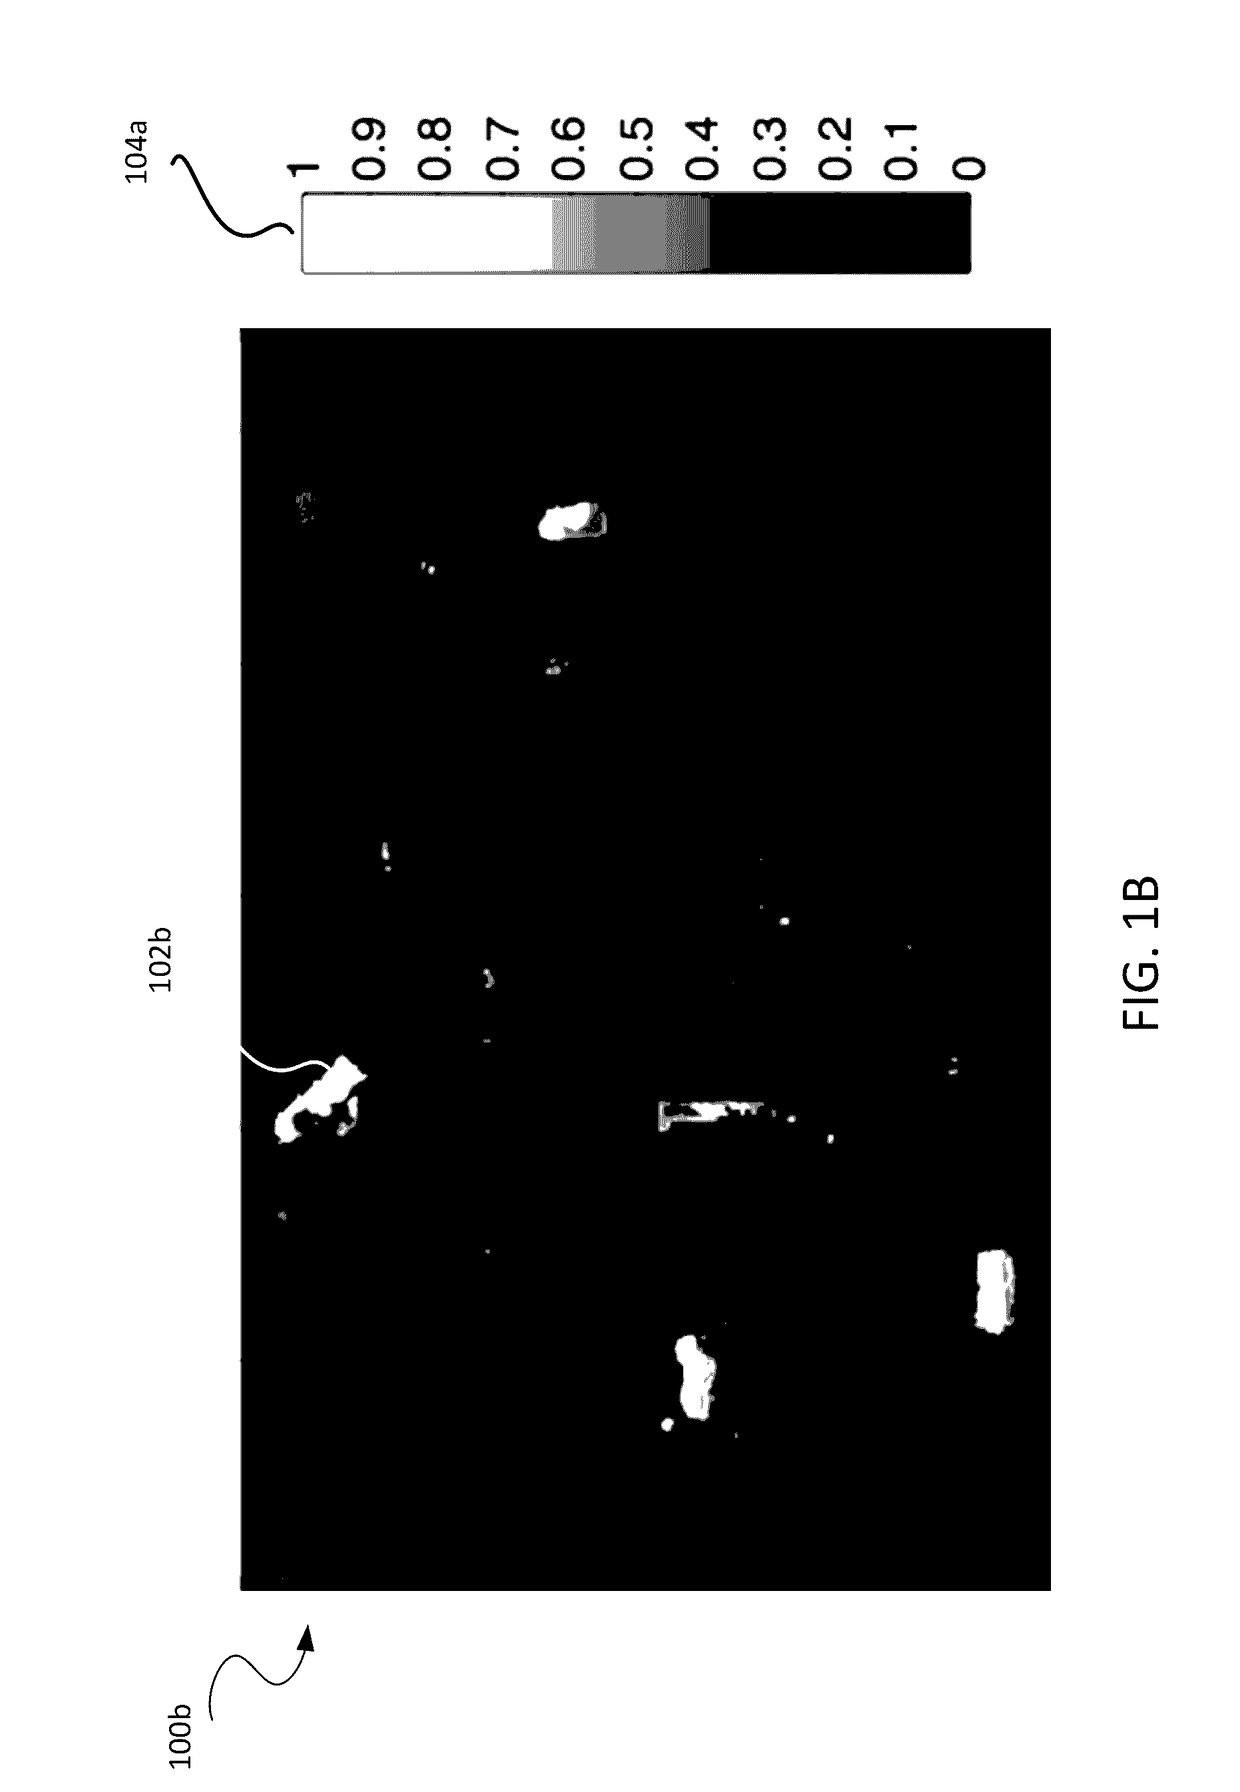 Systems and methods for analyzing remote sensing imagery